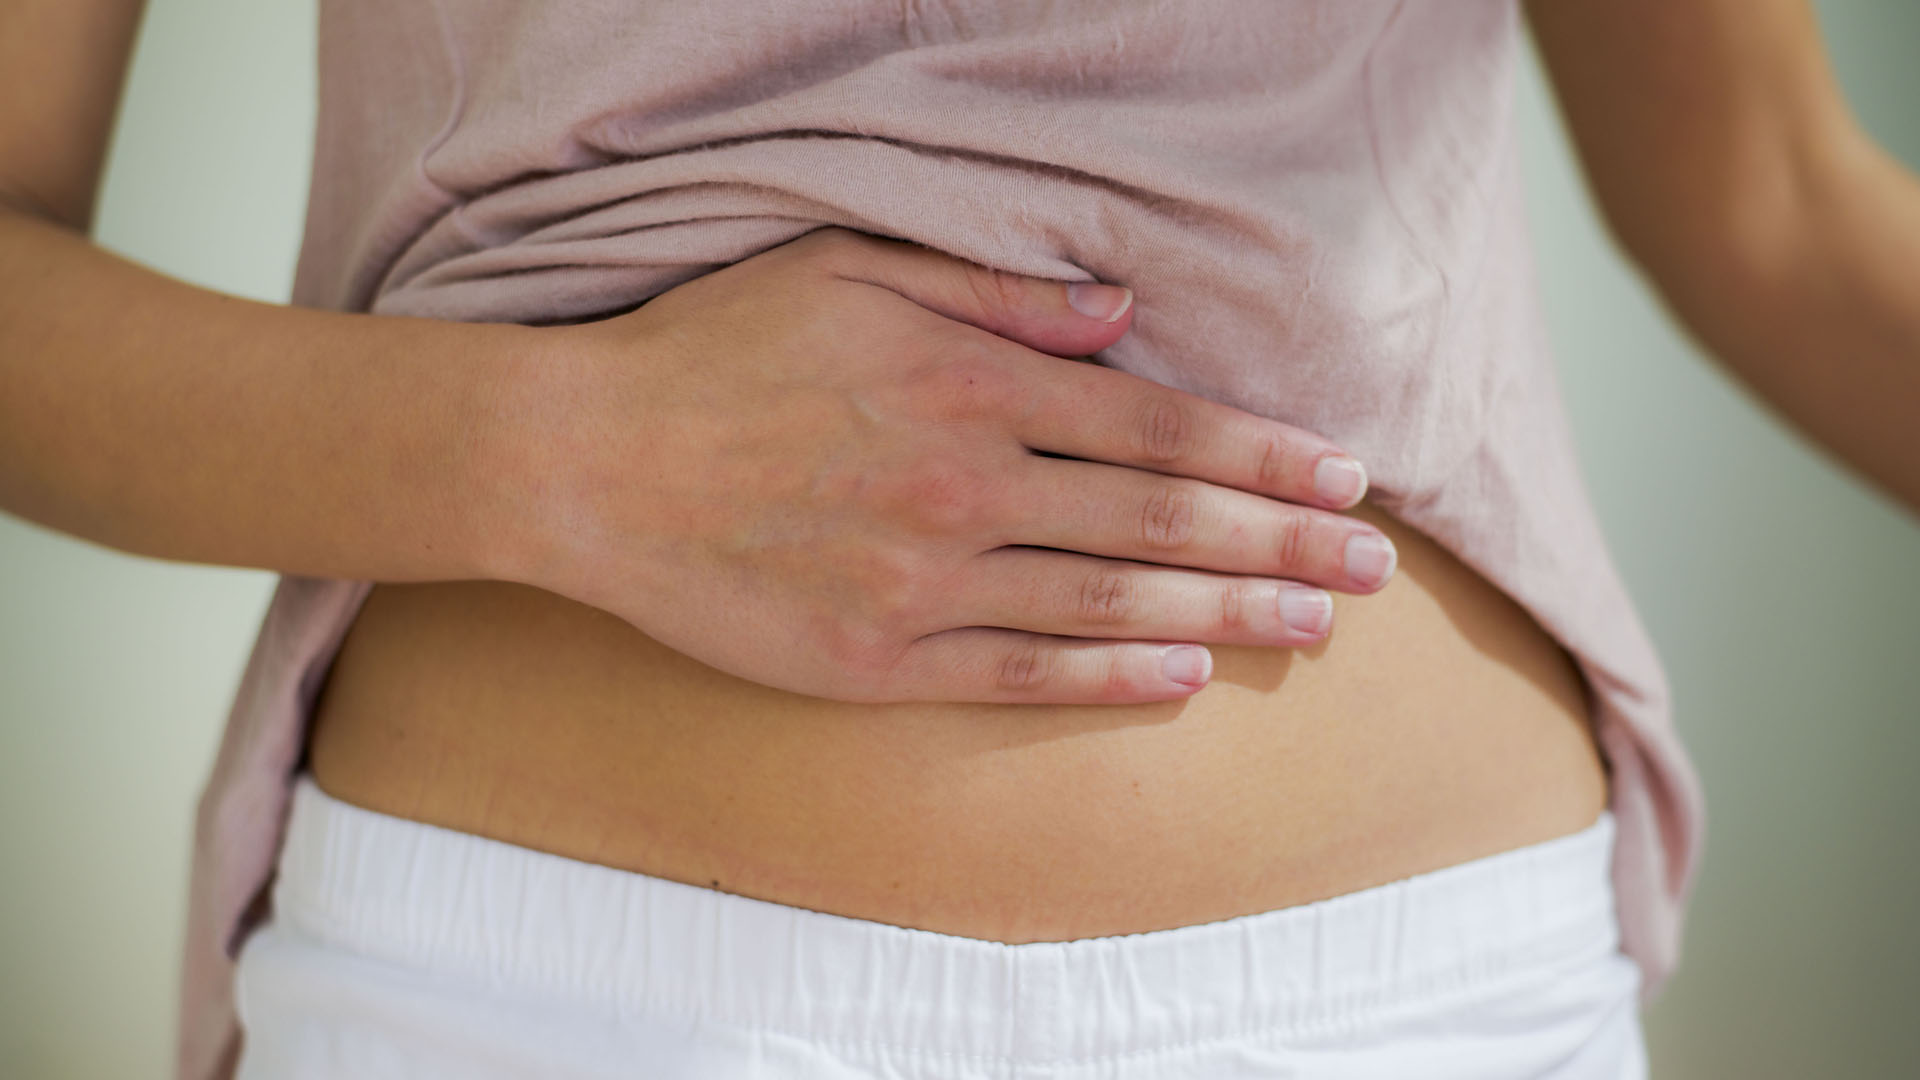 Although Most People May Not Know It, Stress Can Also Affect The Pelvic Floor (Getty).